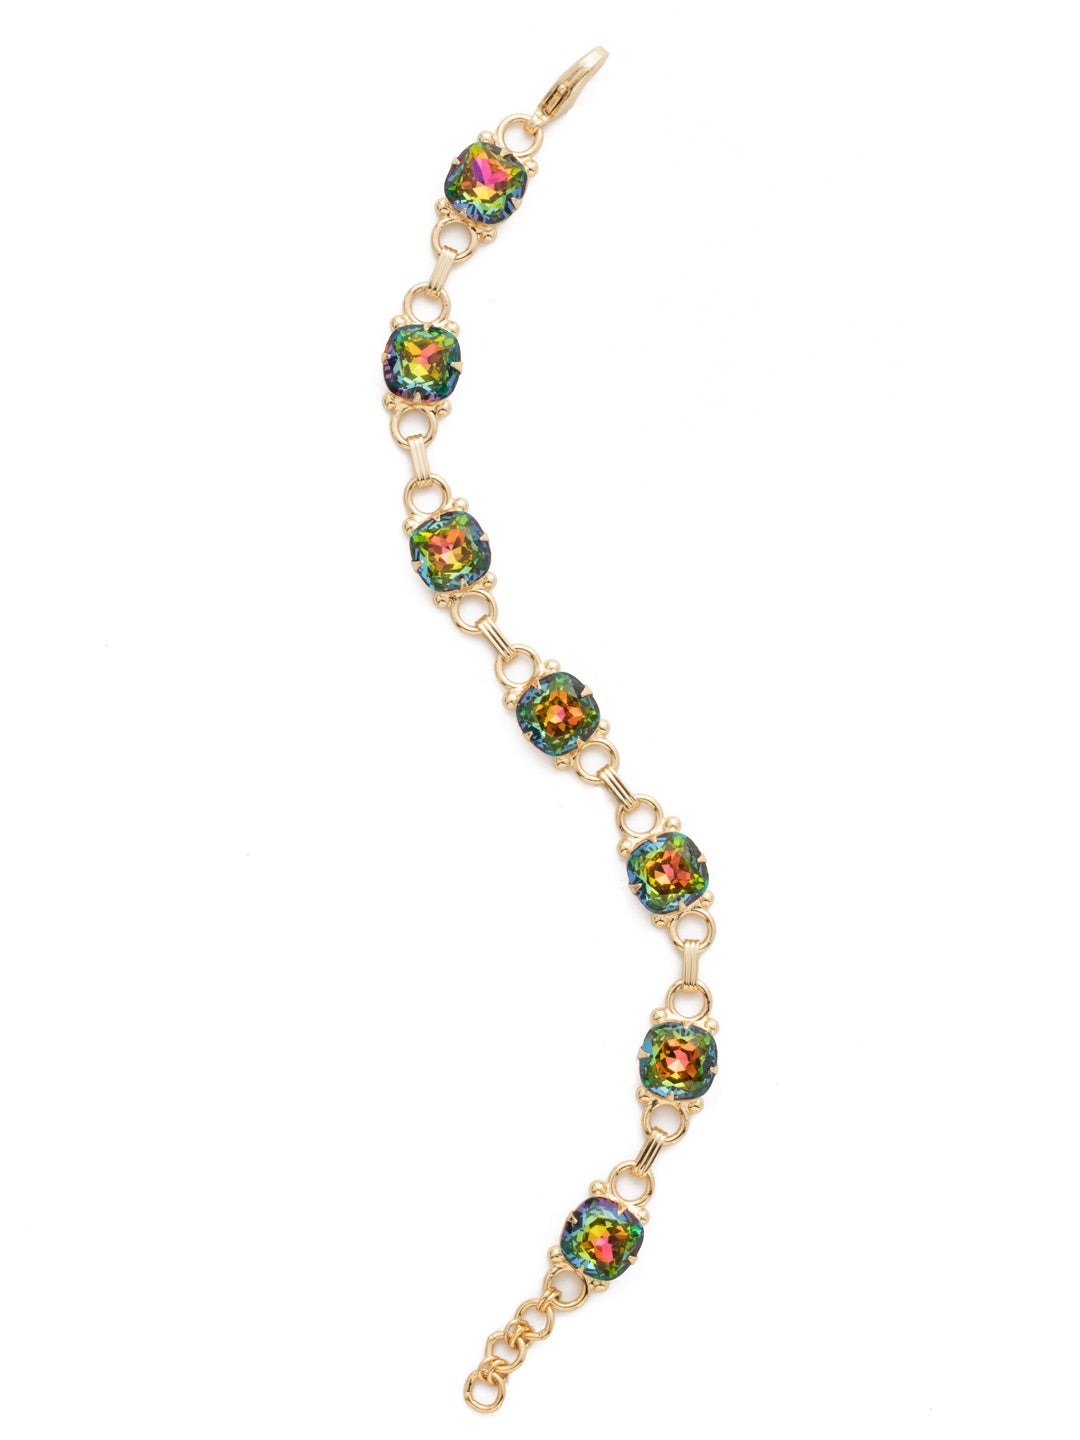 Eyelet Line Tennis Bracelet - BDN16BGVO - A classic design that can be added to any look for just enough sparkle. From Sorrelli's Volcano collection in our Bright Gold-tone finish.